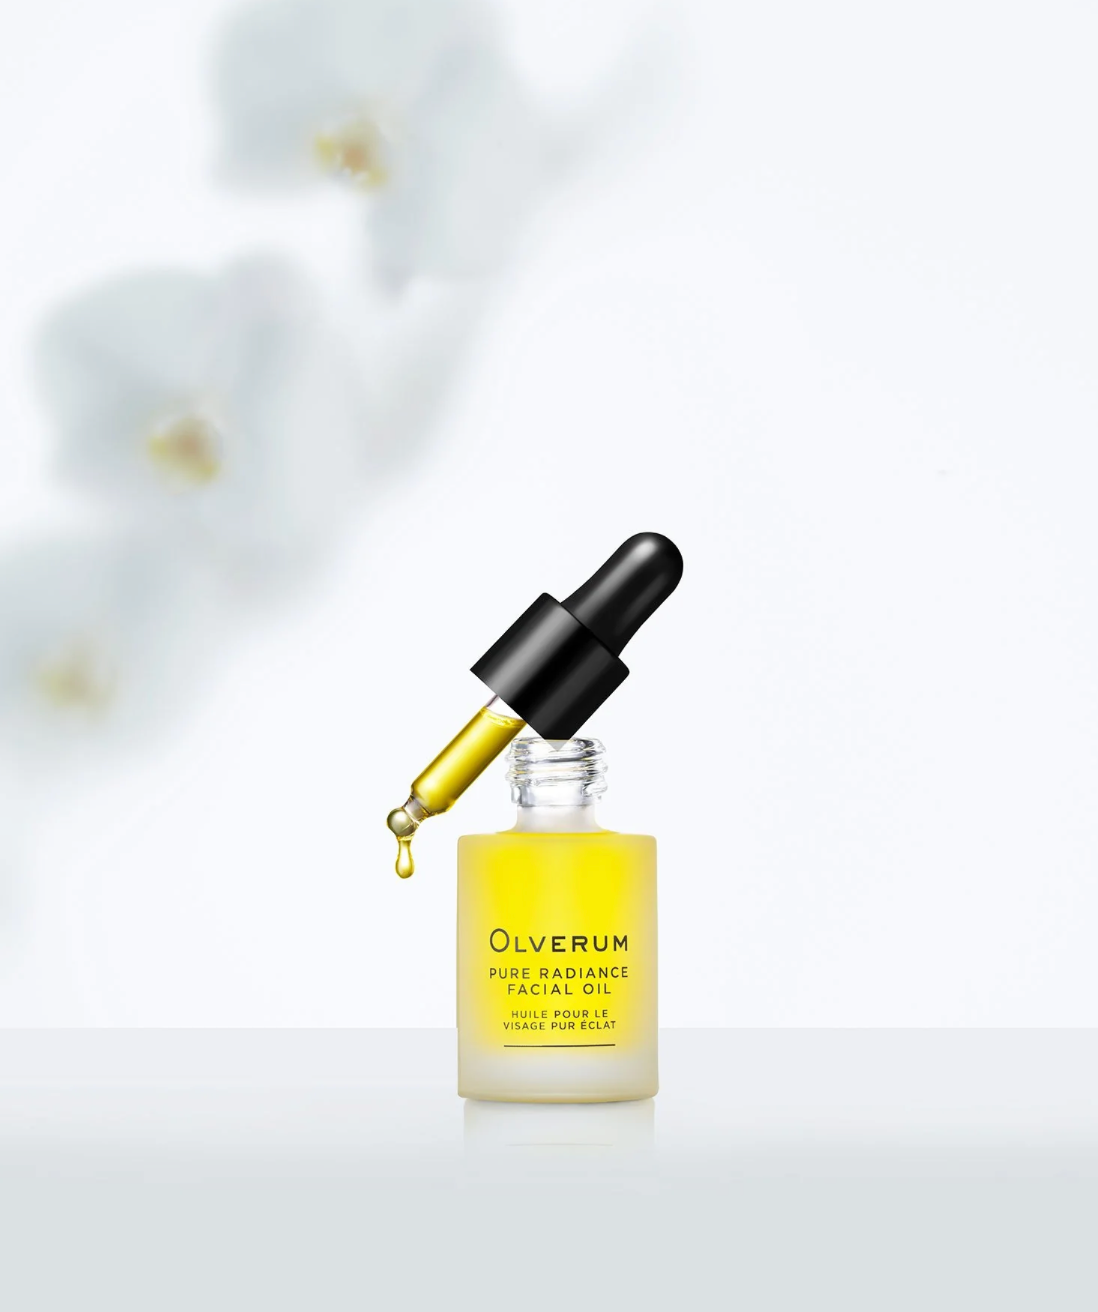 Hetre Alresford Hampshire Accessories Store Olverum Pure Radiance Facial Oil